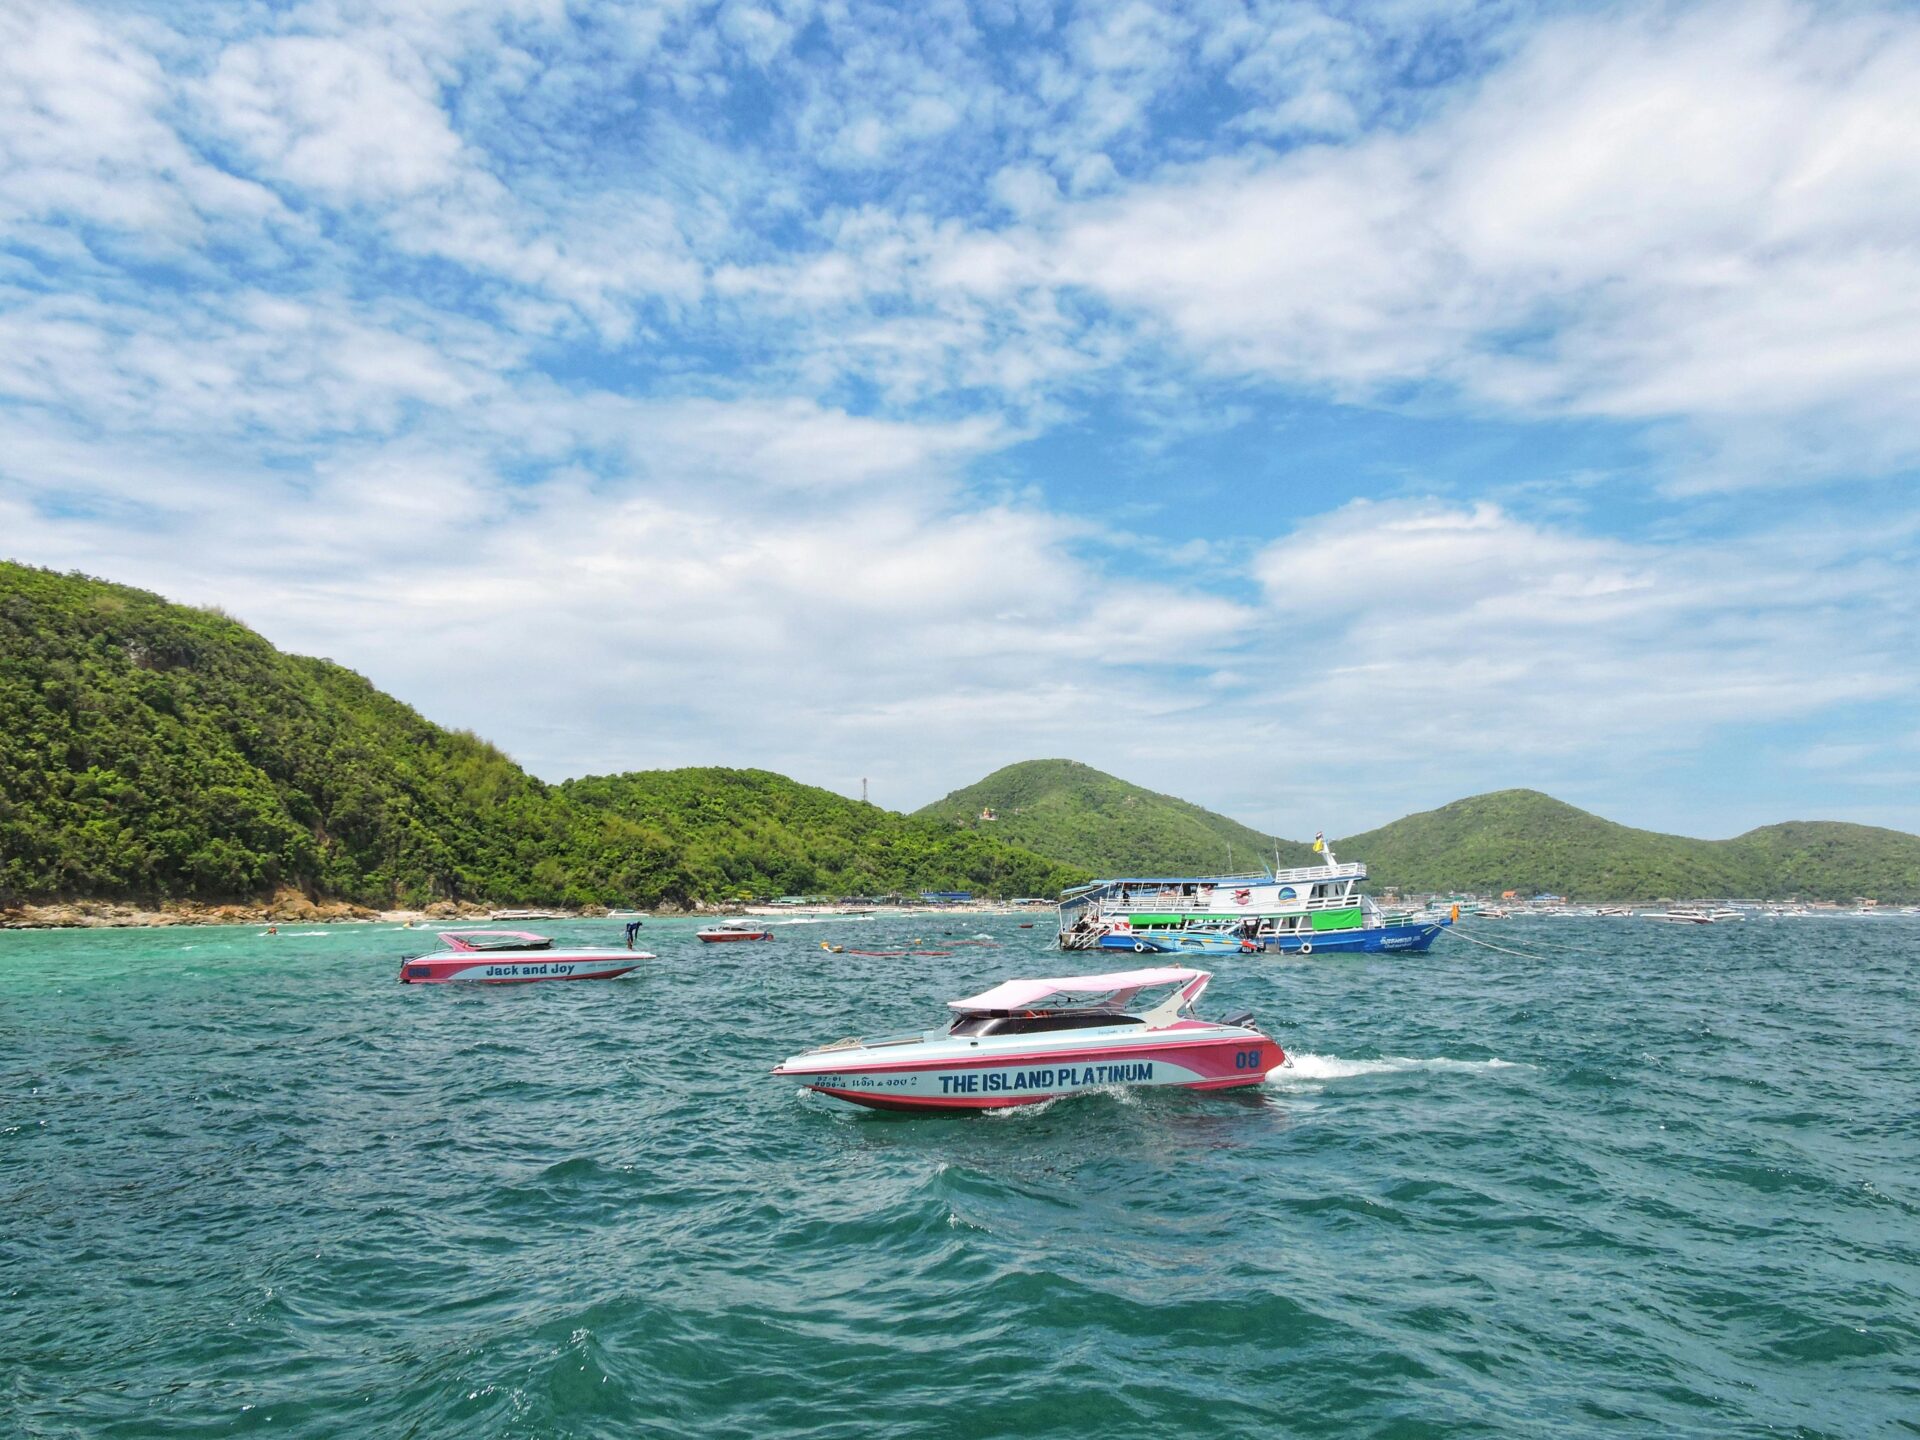 Speedboats for tourists visiting Koh Larn, a small Thai island off the coast of Pattaya.